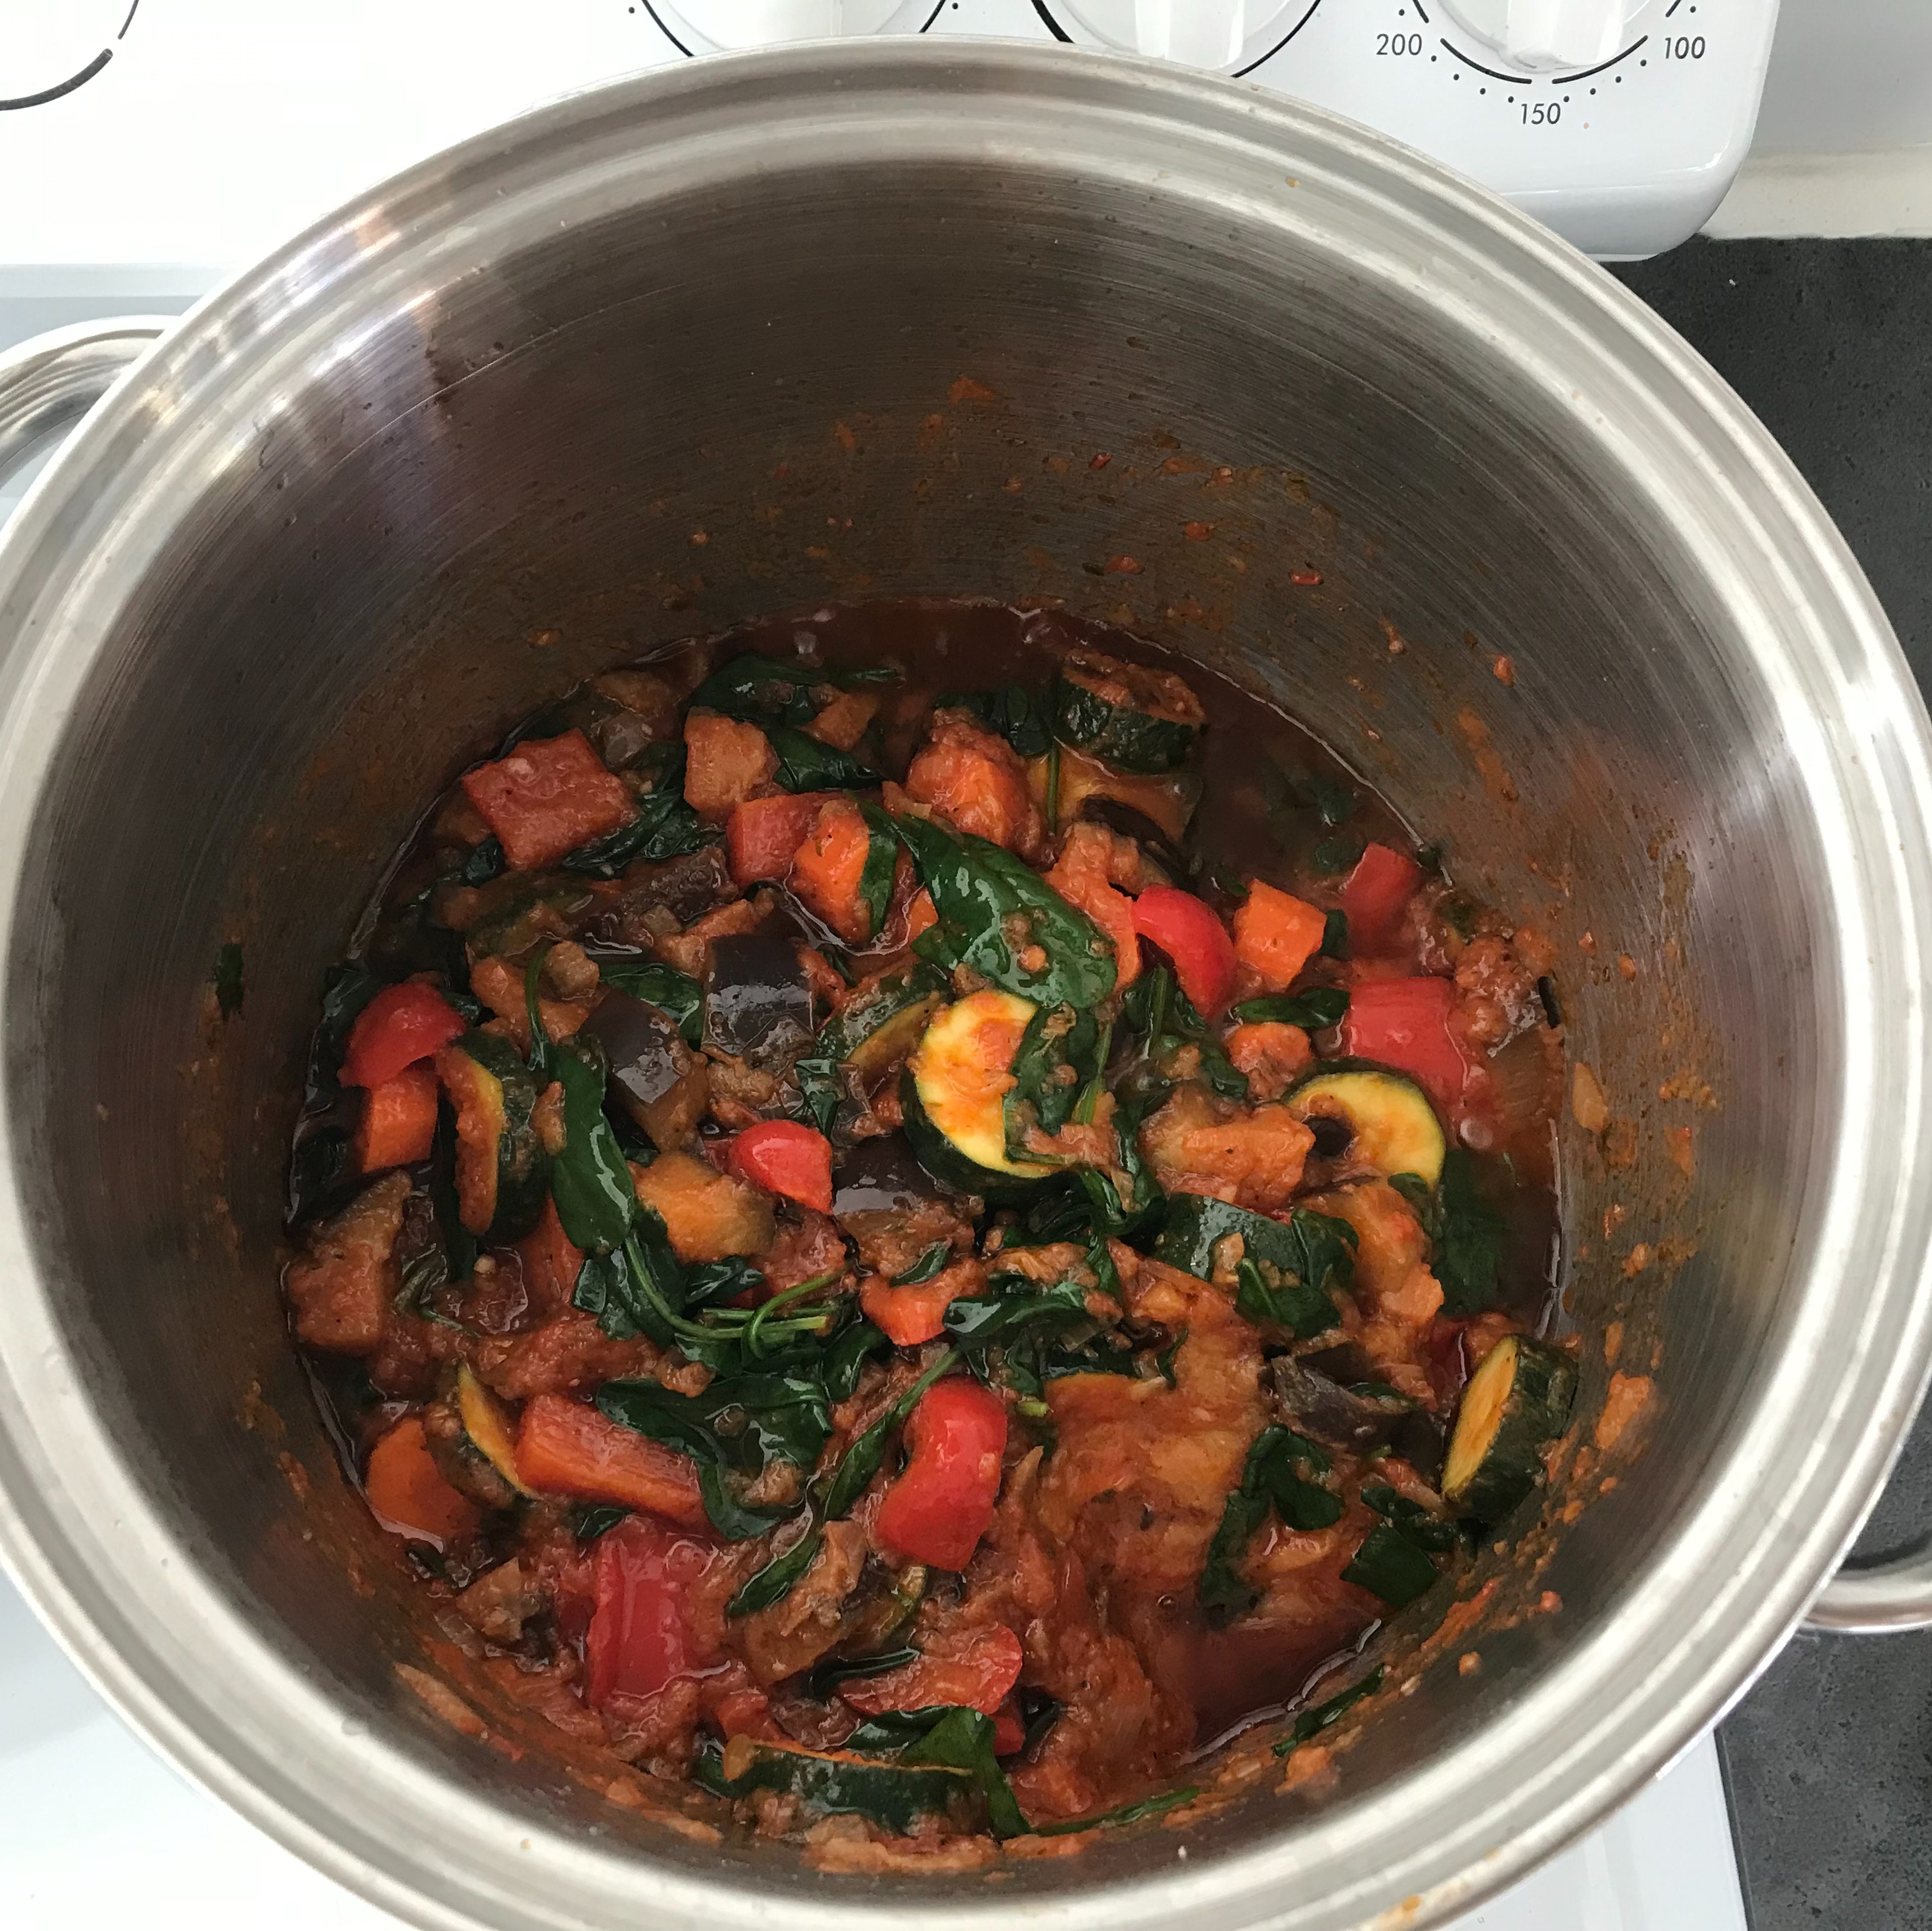 Meanwhile, add spinach to the saucepan and cook for 2 minutes or until just wilted.